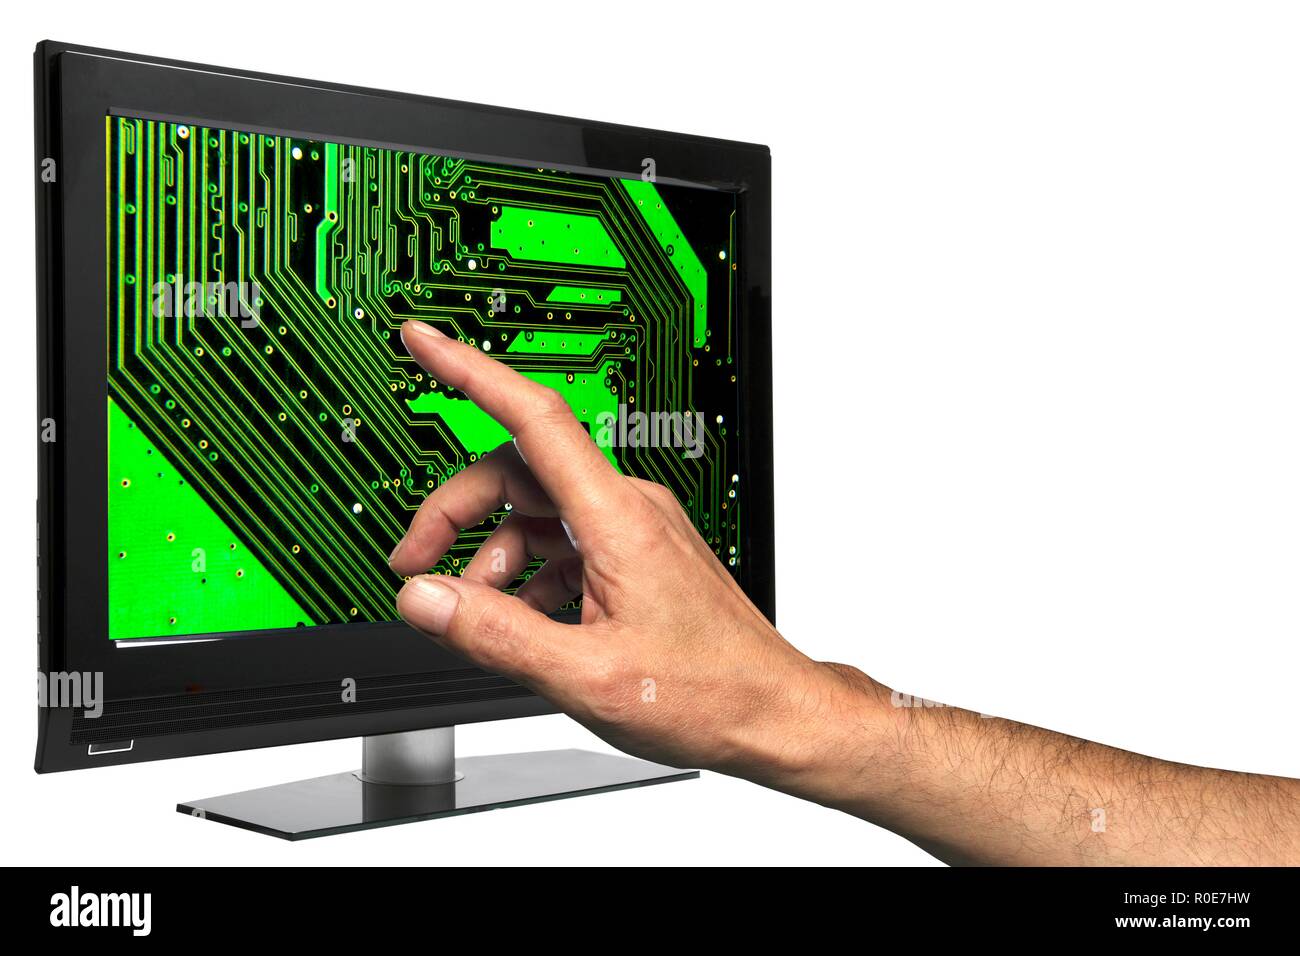 Touch screen television with circuit board, illustration. Stock Photo